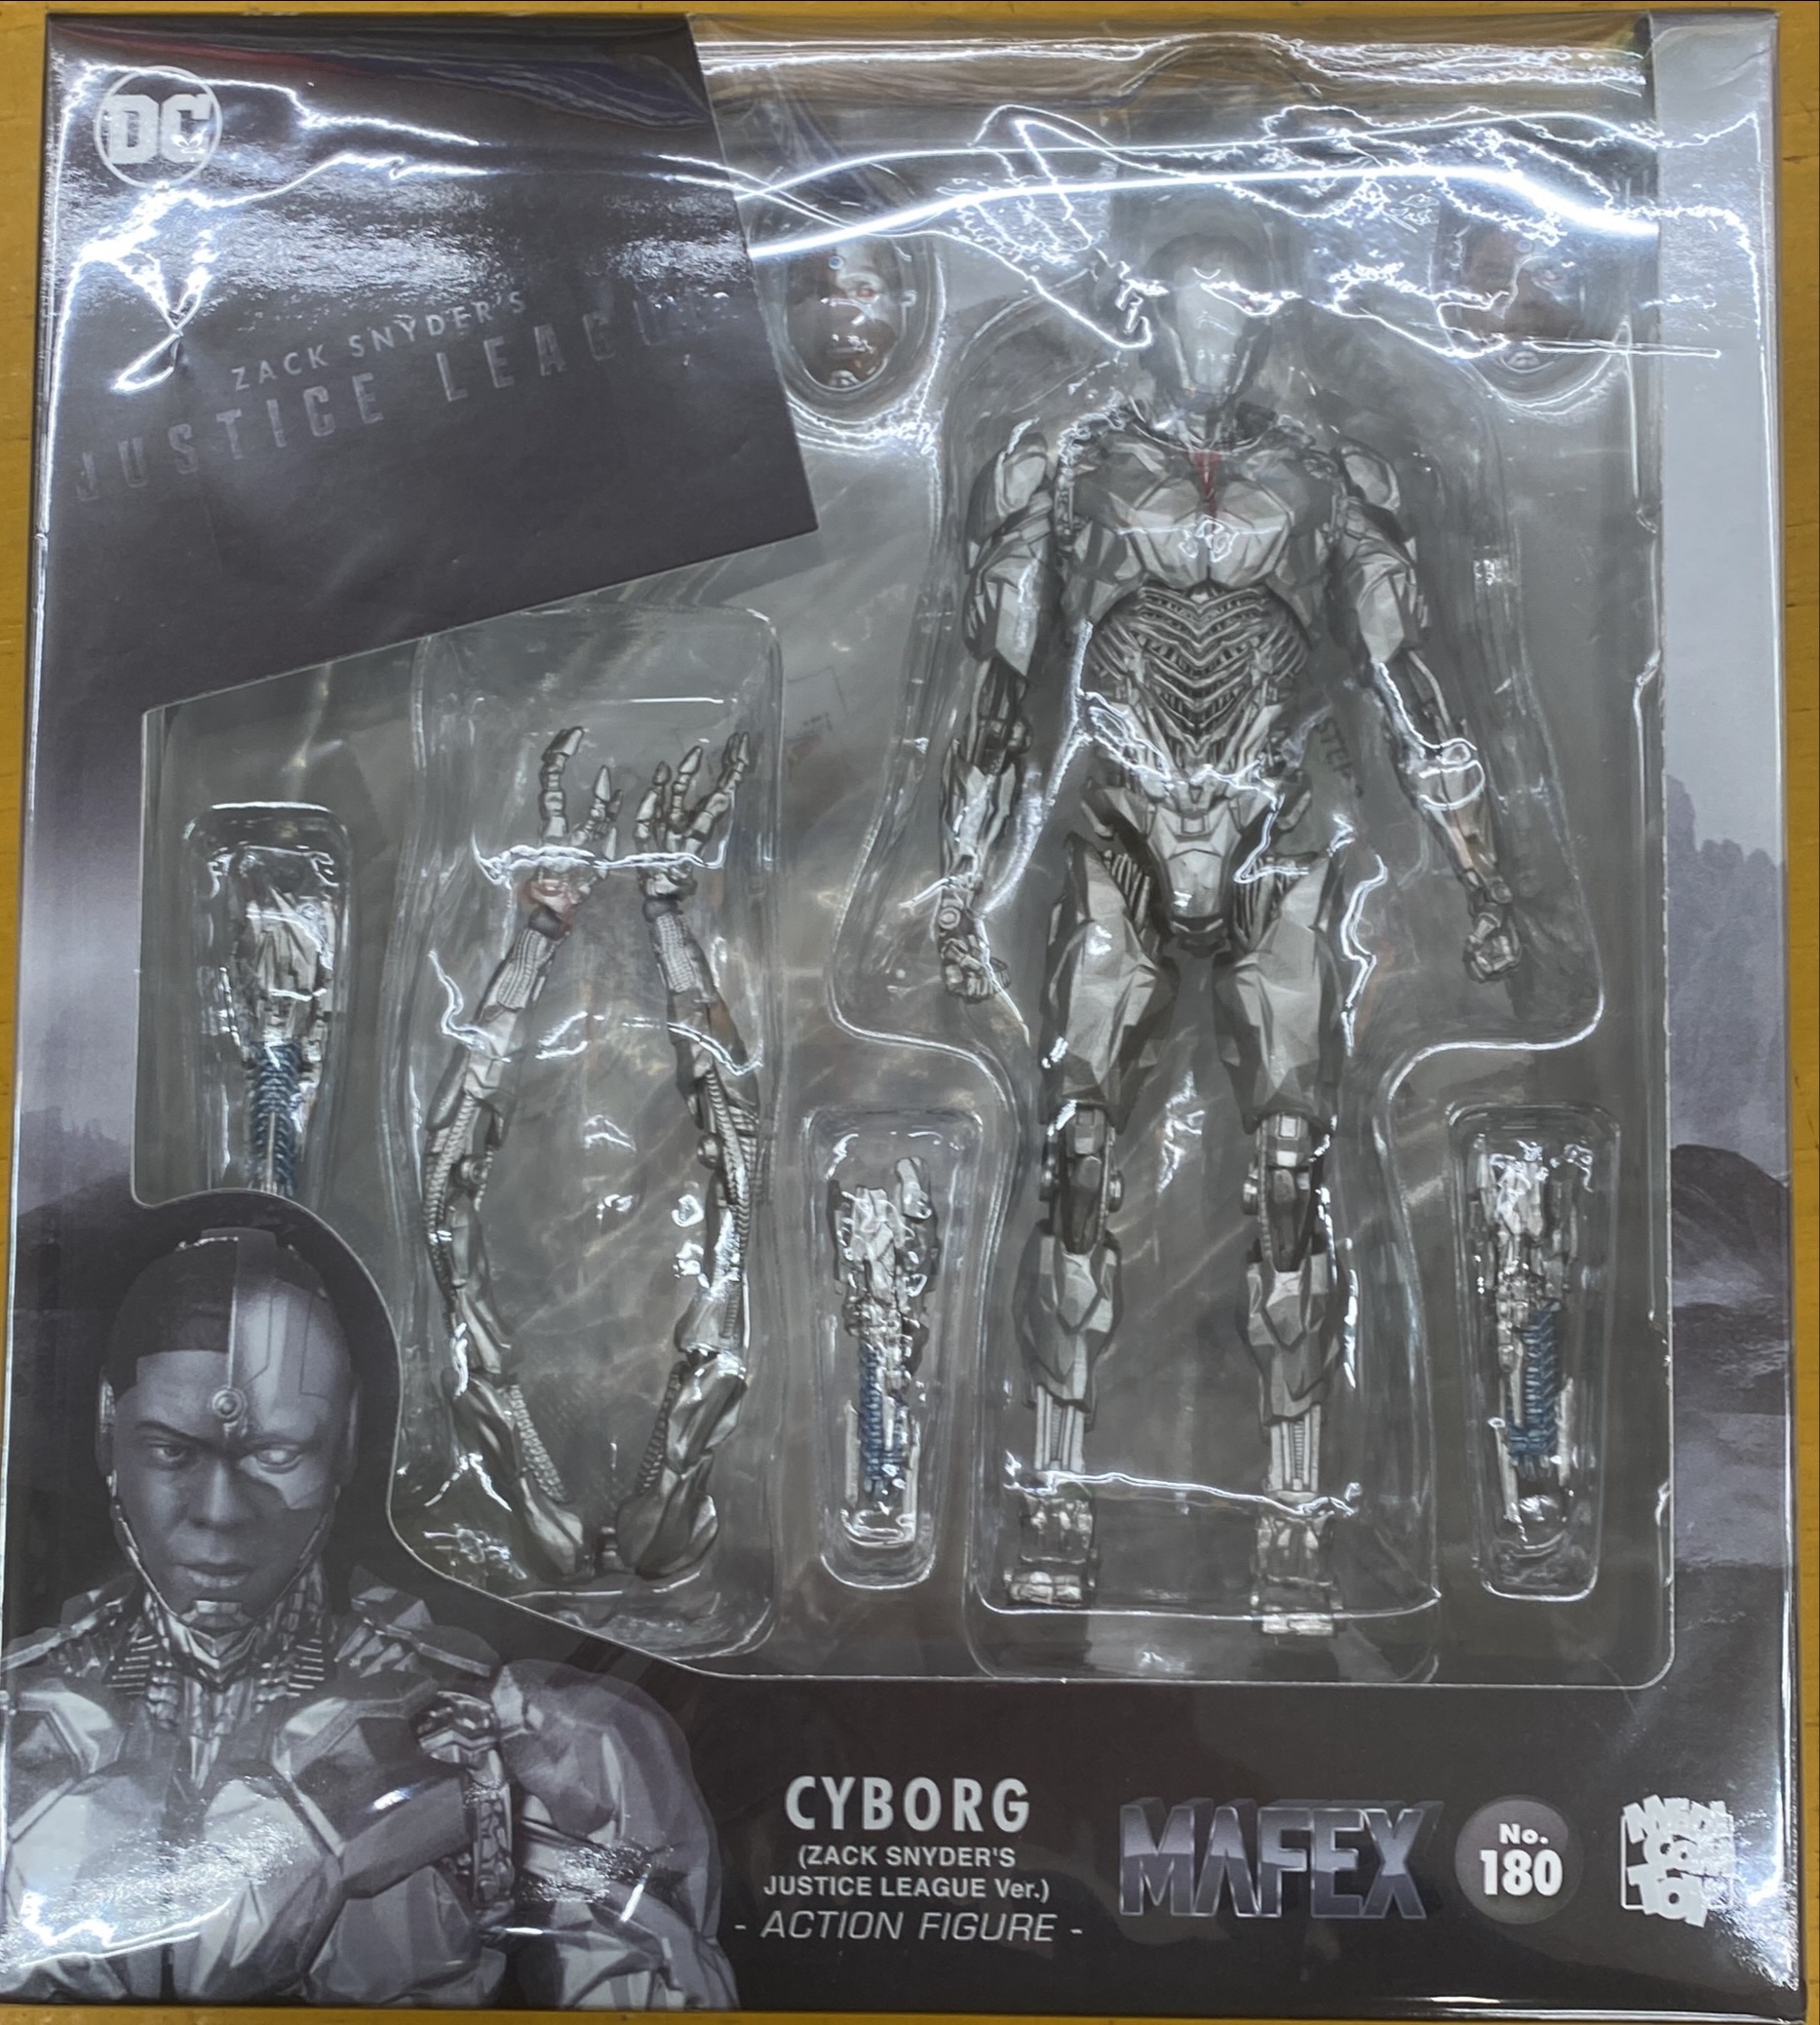 MAFEX マフェックス No.180 CYBORG サイボーグ (ZACK SNYDER’S JUSTICE LEAGUE Ver.)